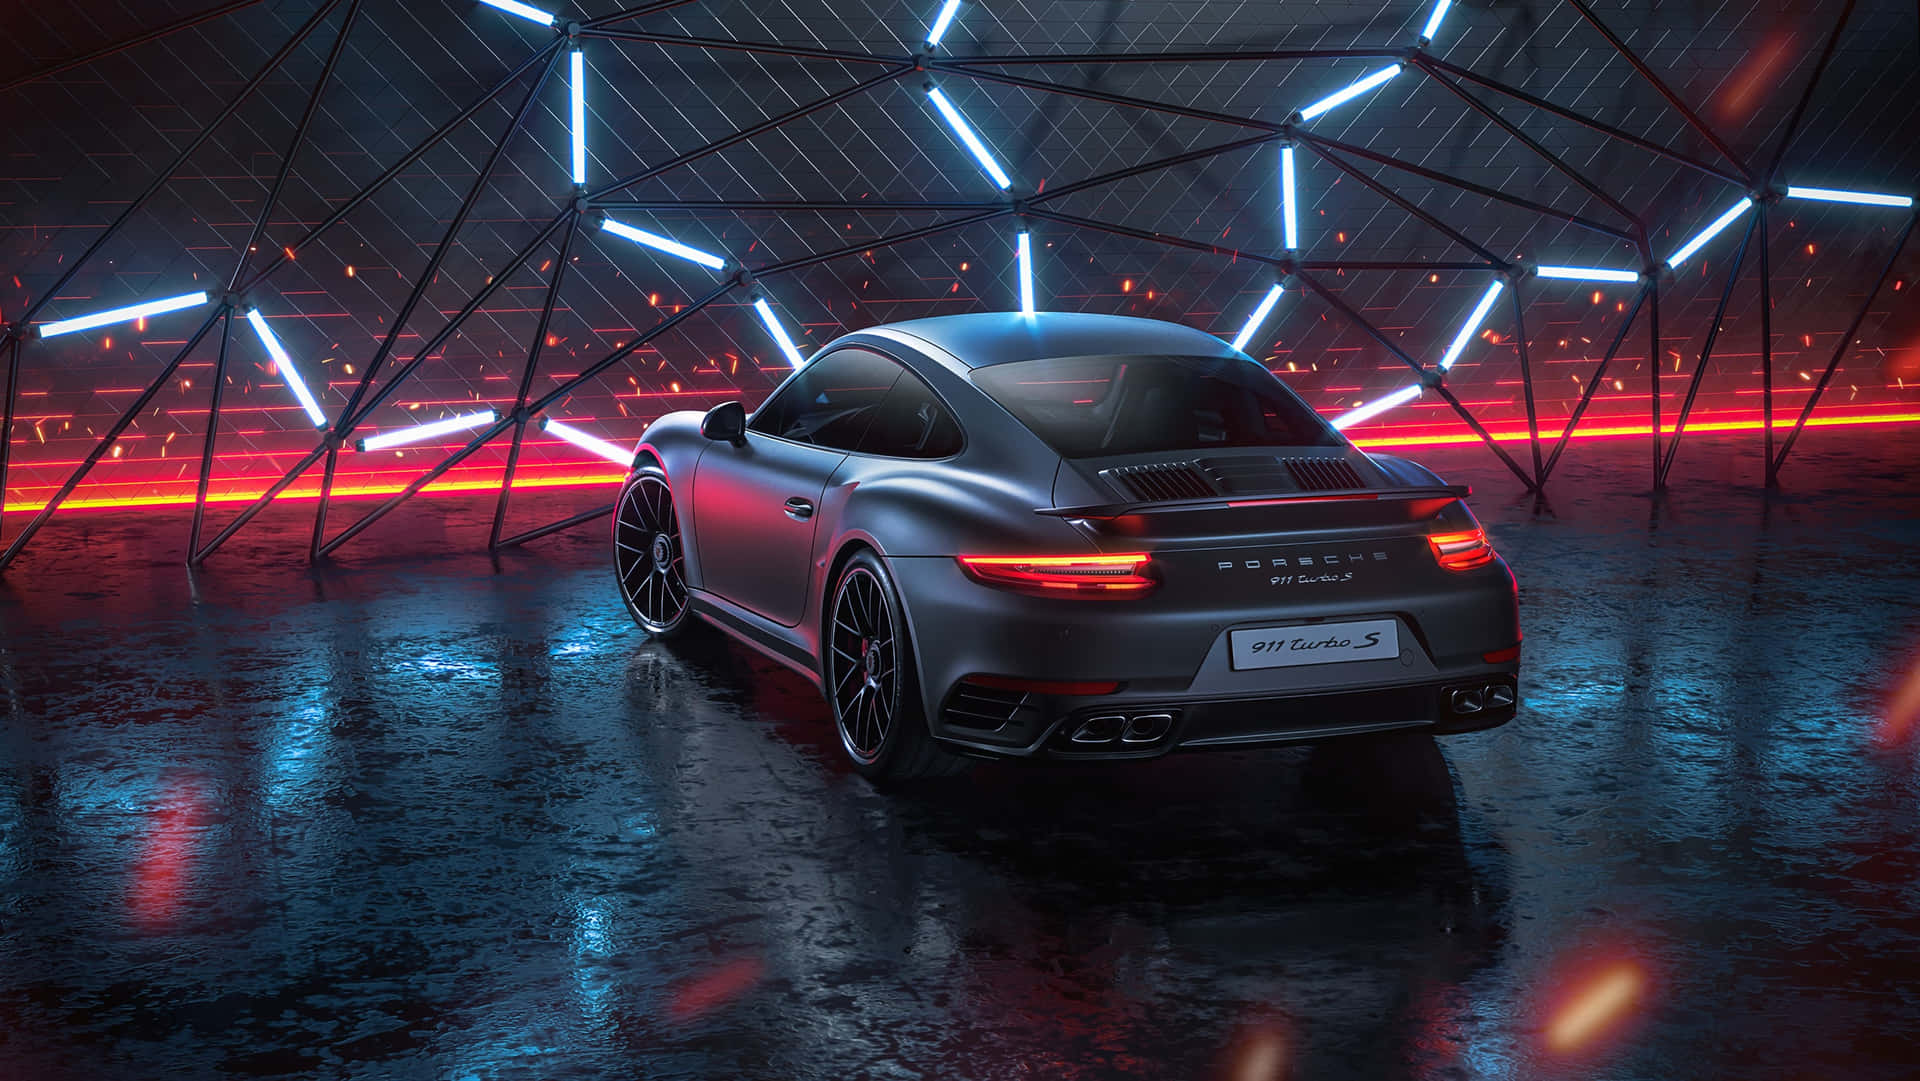 Get Behind The Wheel Of A Porsche And Experience Breathtaking 4k Ultra Hd Quality.